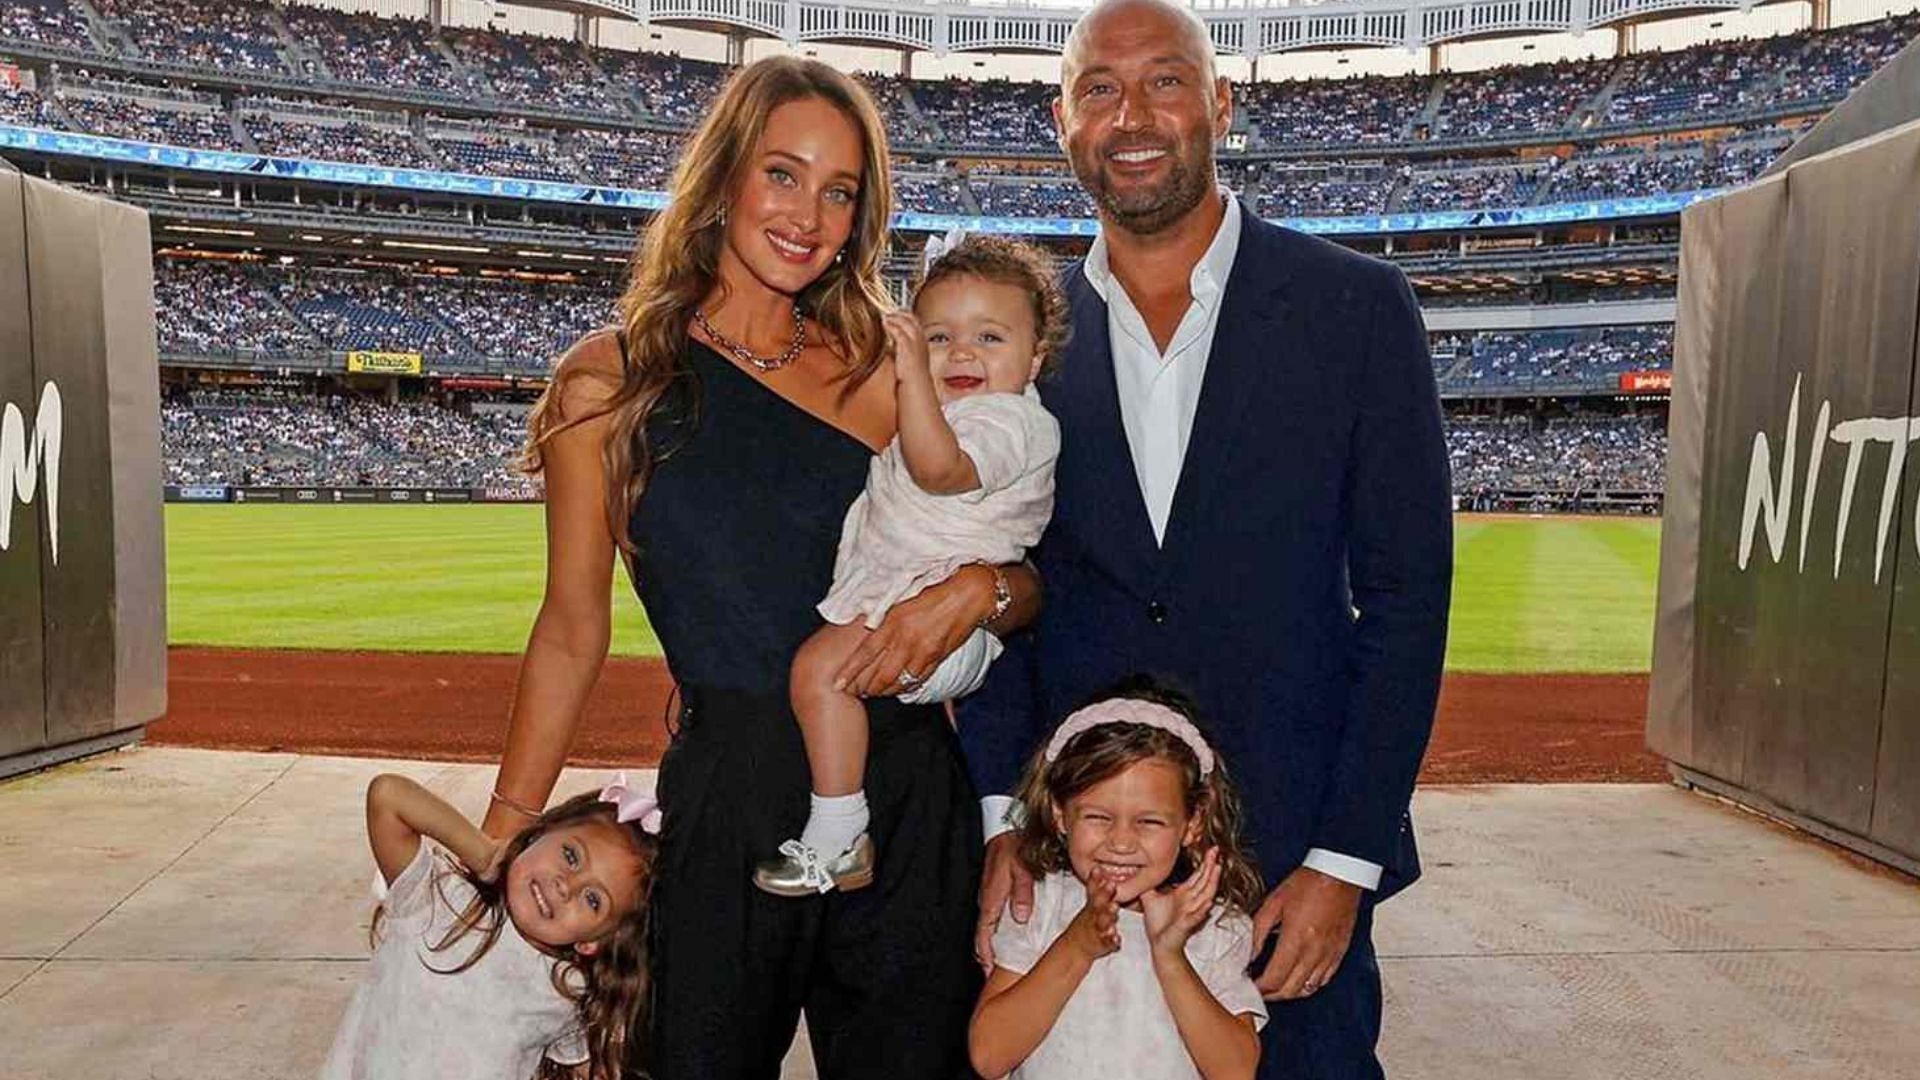 Derek Jeter and his wife Hannah with kids.